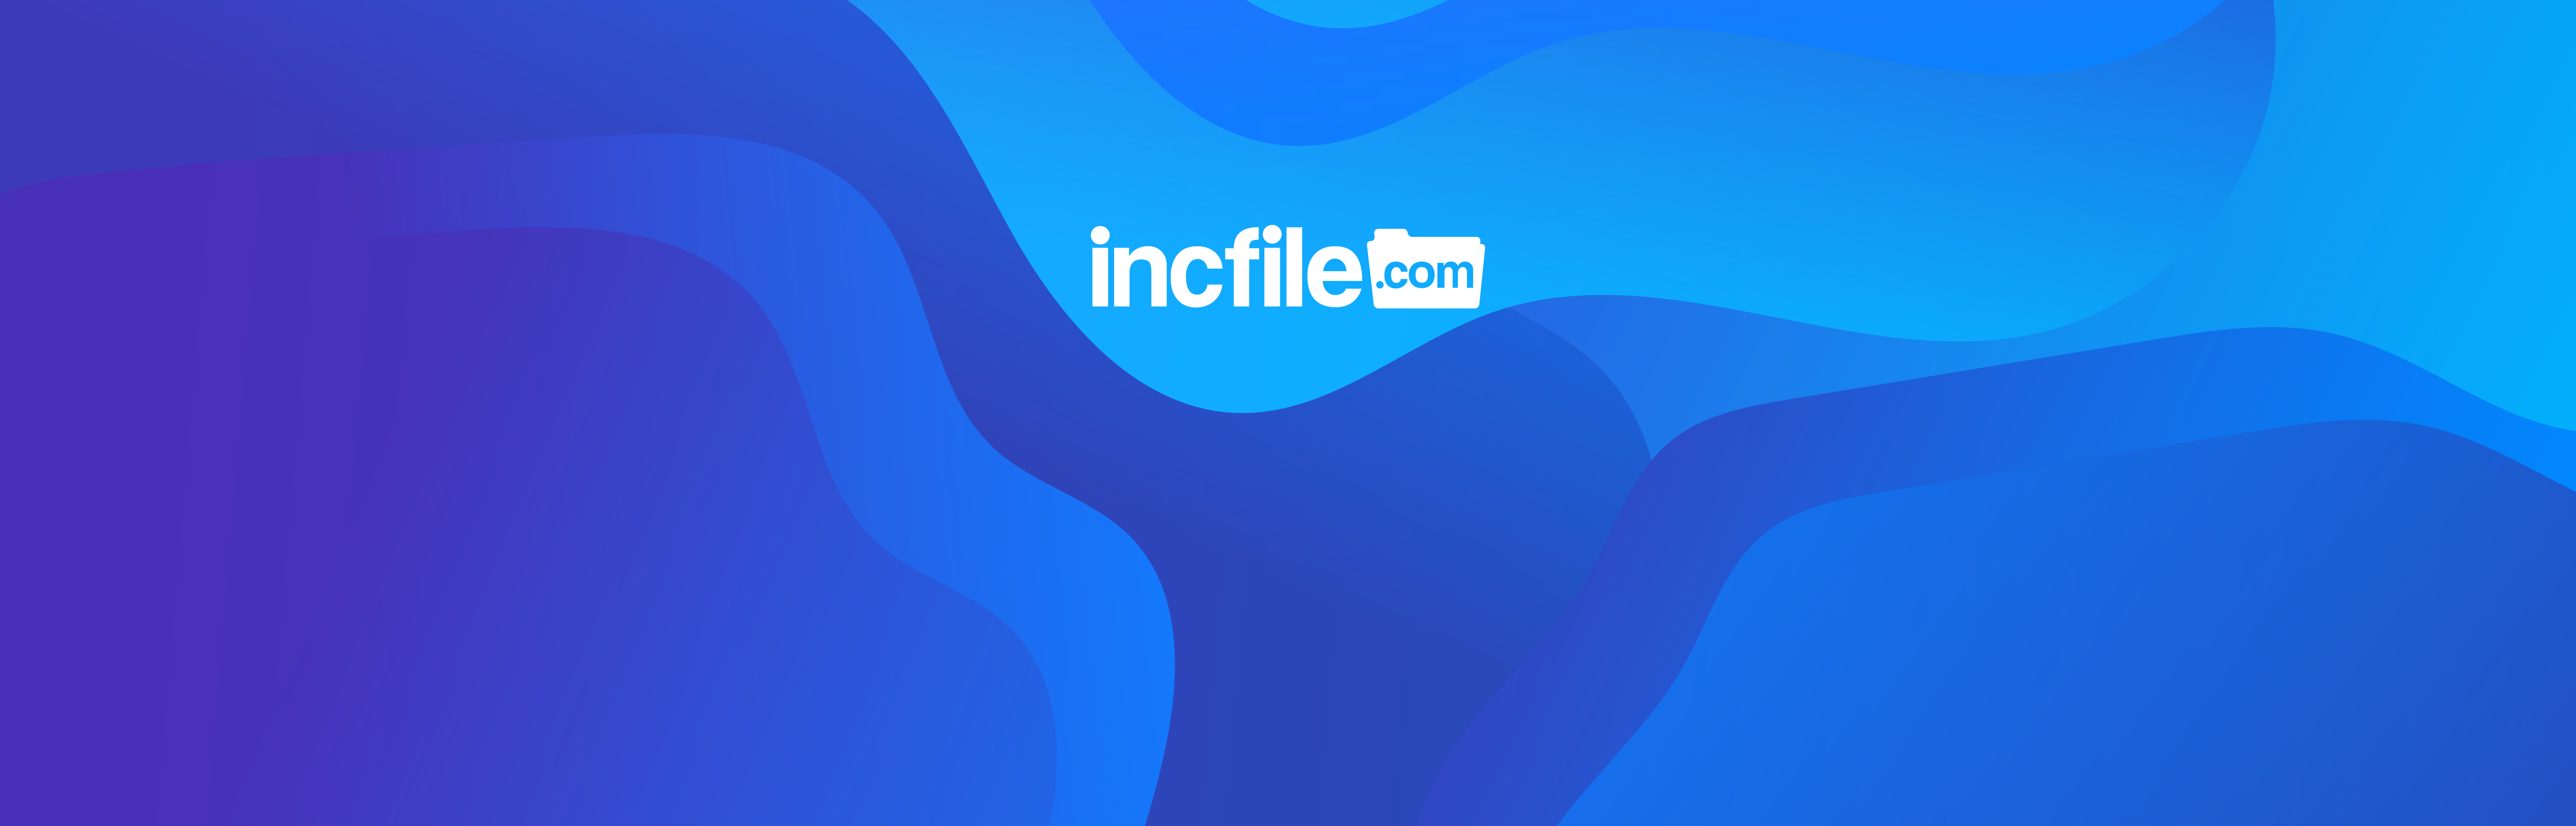 Incfile Support Number